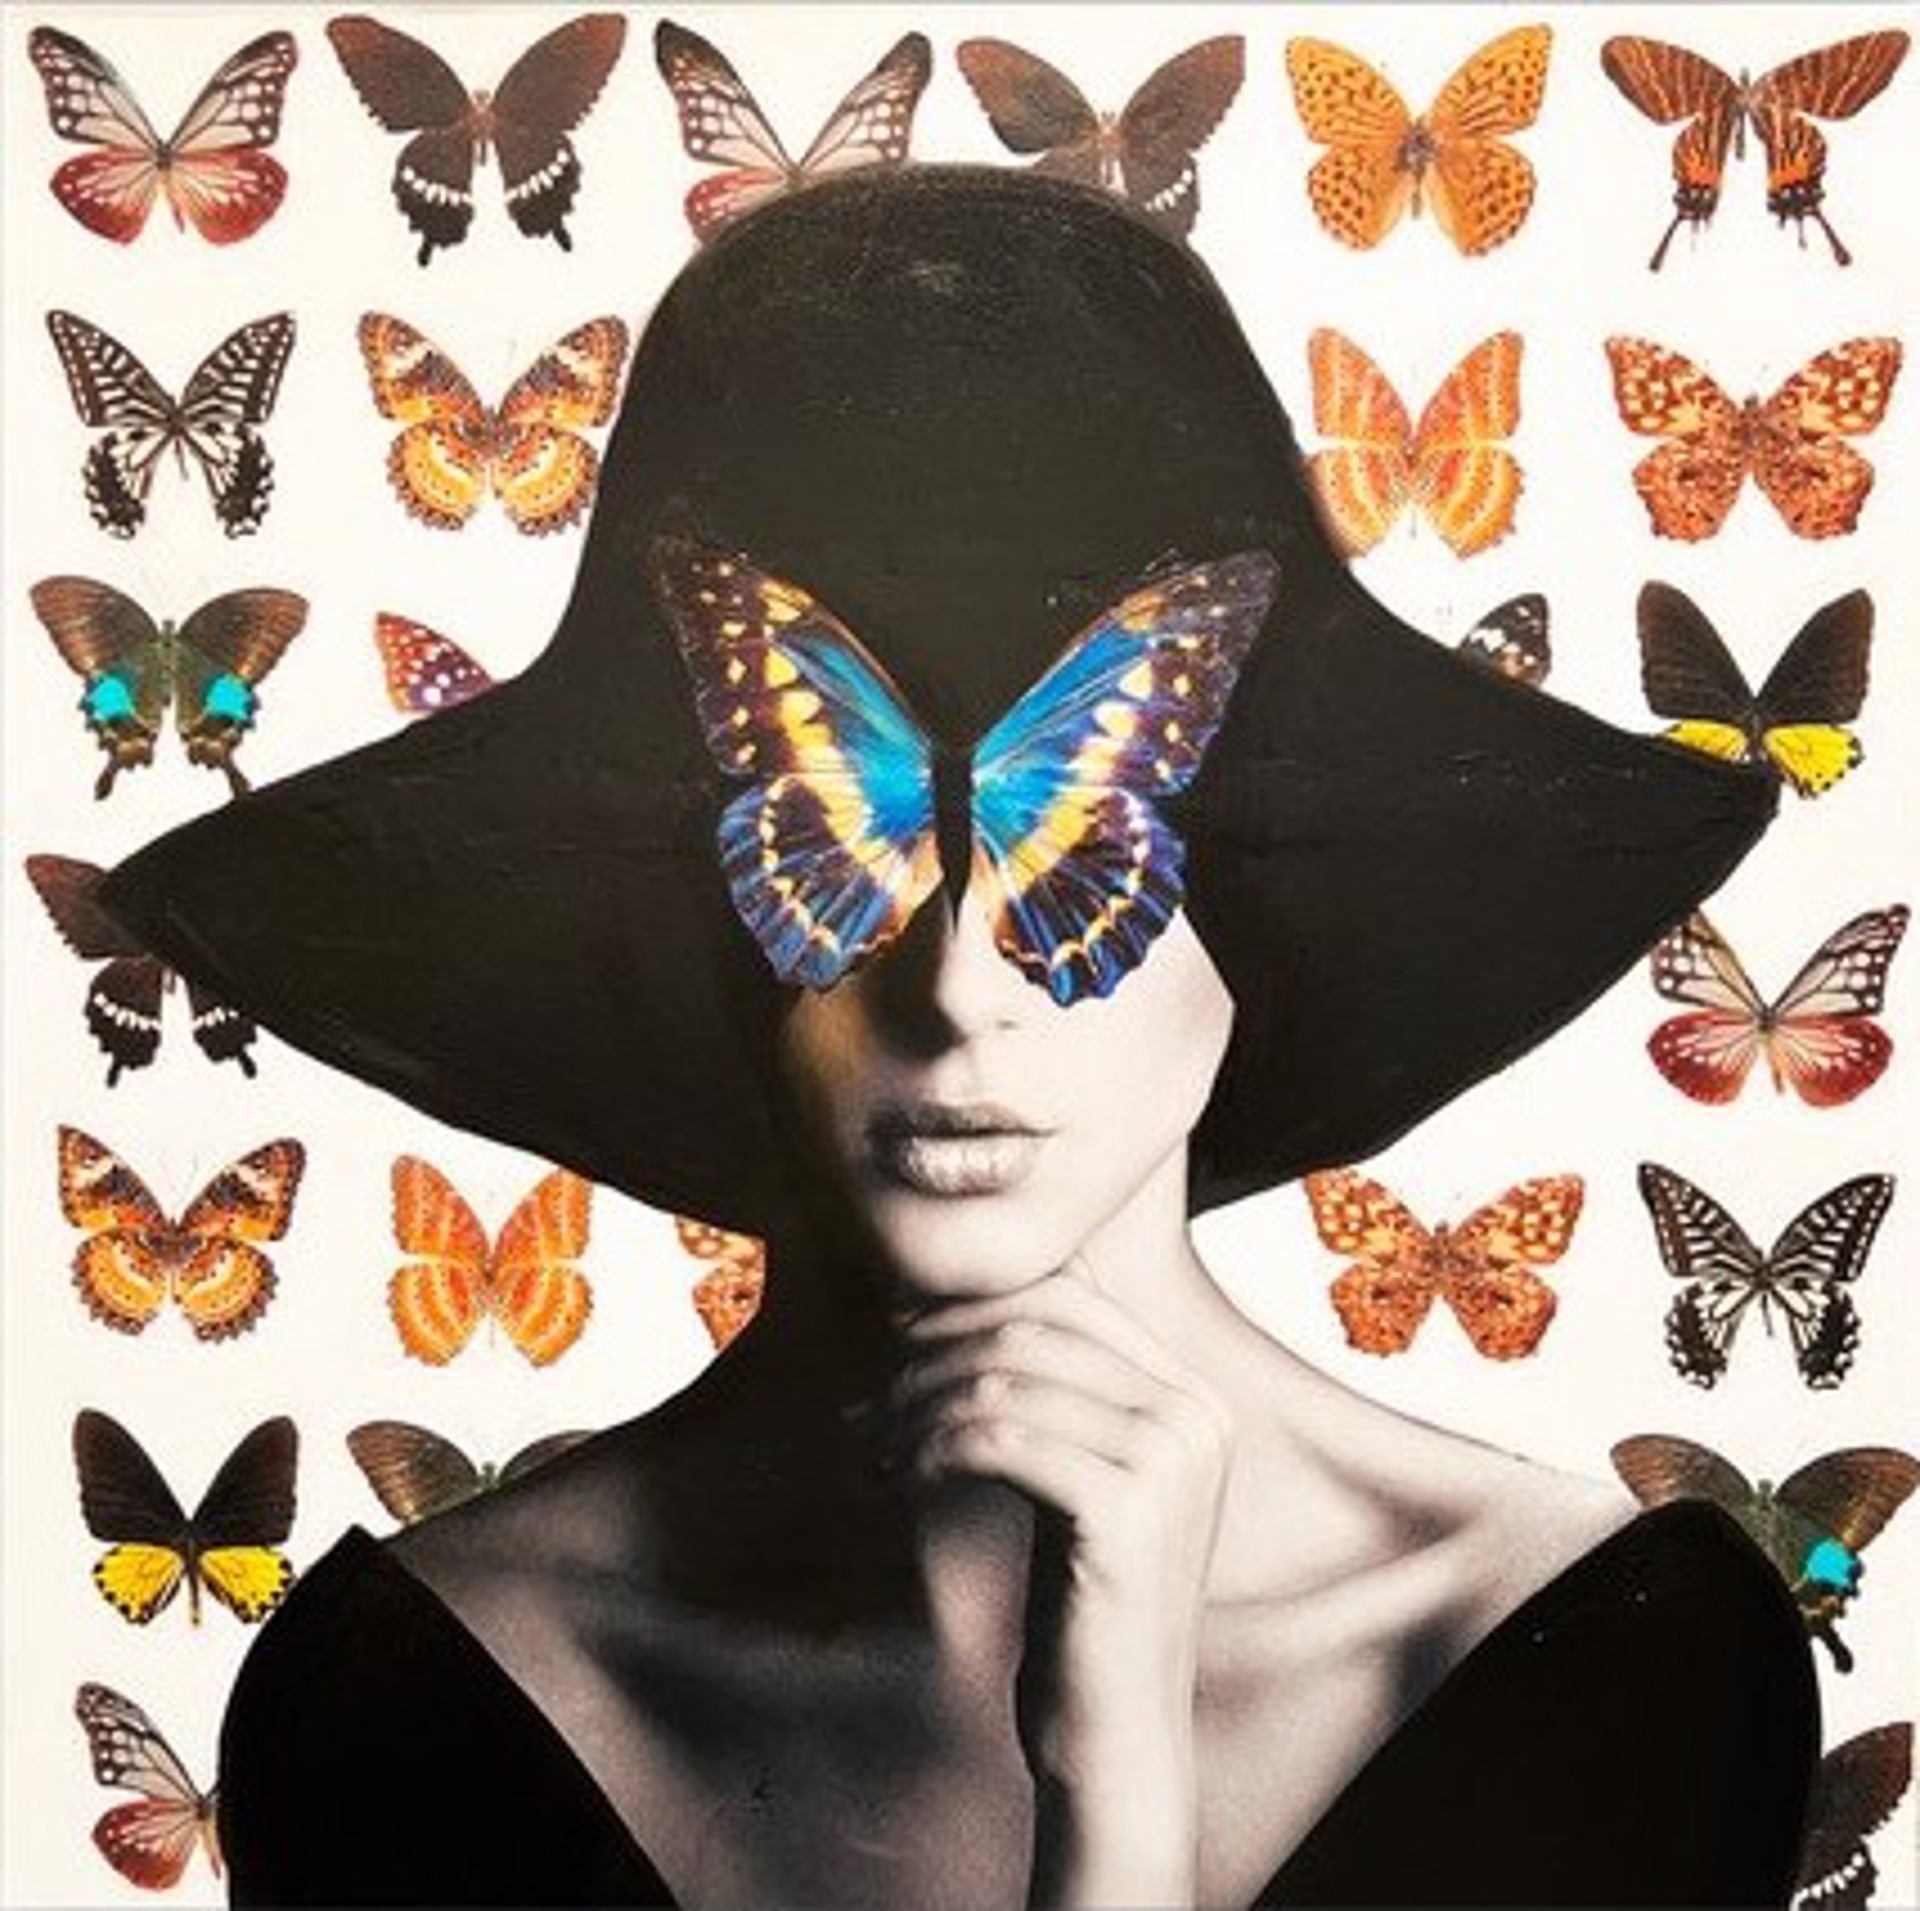 Madame Butterfly by Anke Schofield